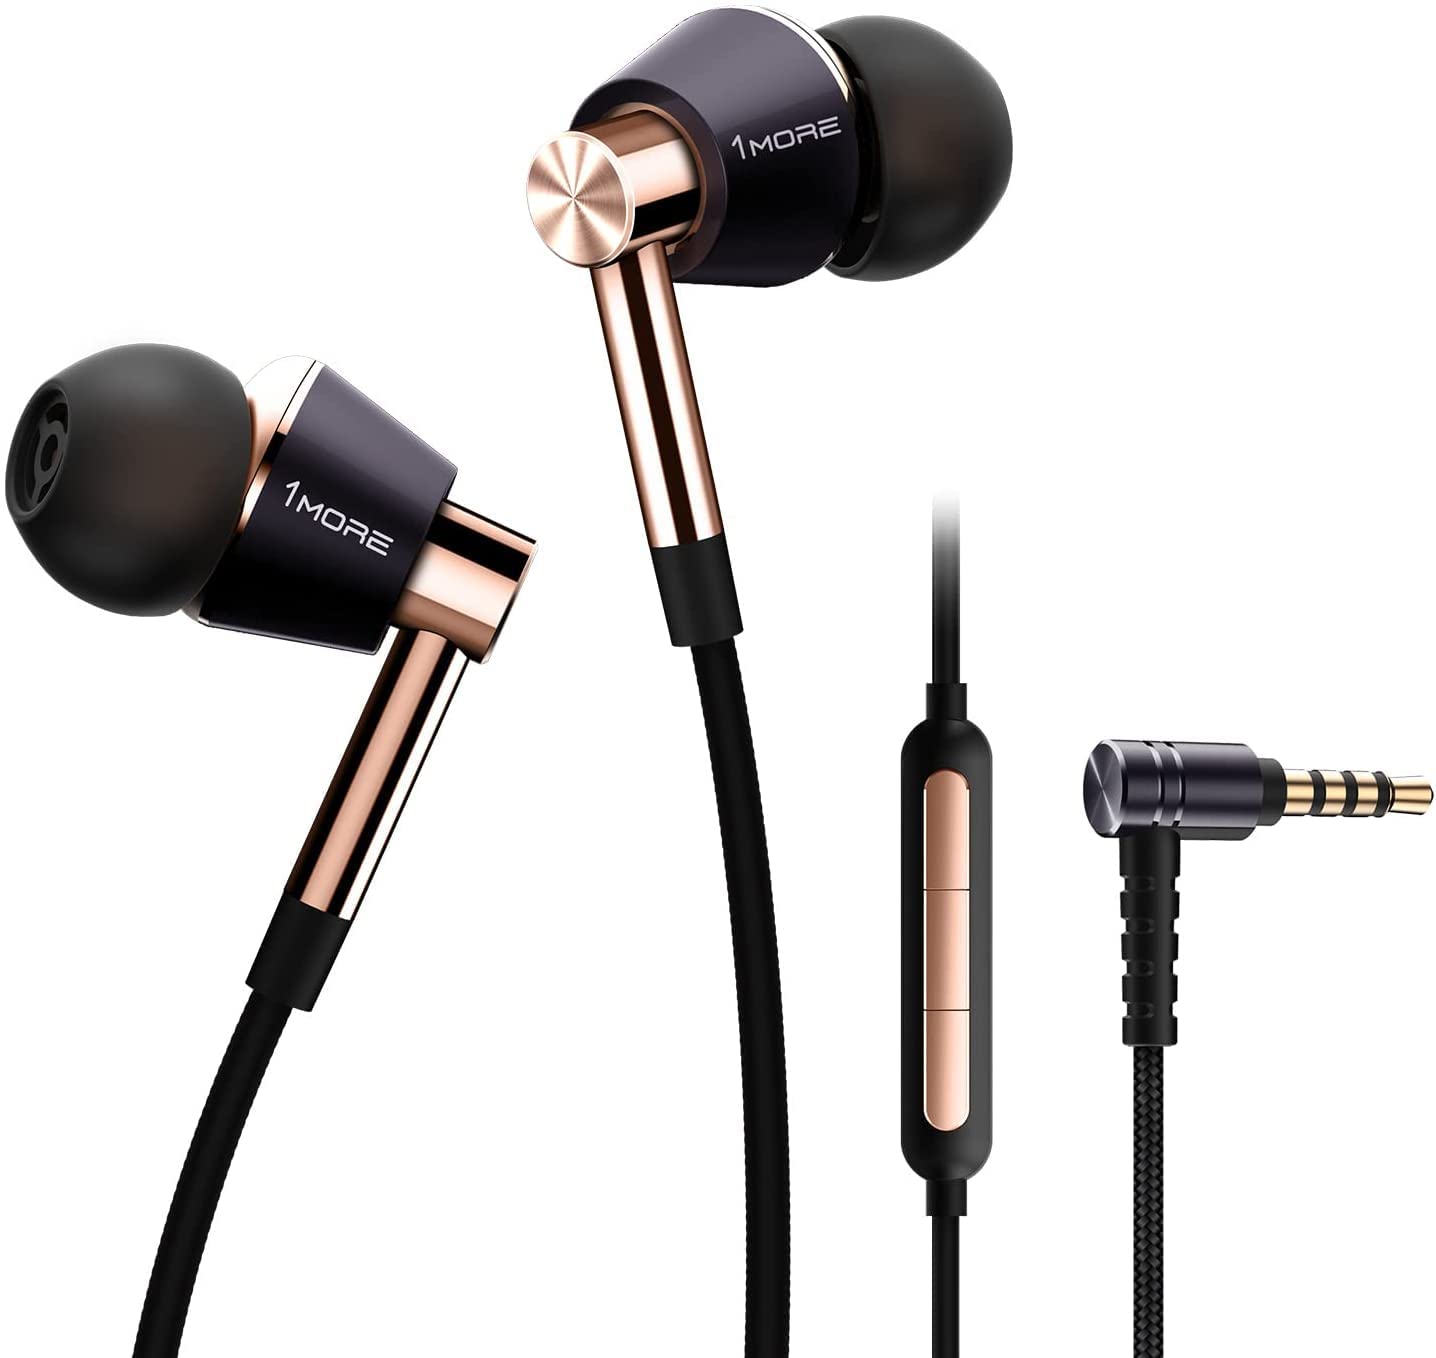 Quality Audio Files: Ensure your music files are of high quality (e.g., lossless formats like FLAC) for better sound reproduction.
Audio Accessories: Consider using high-quality wired headphones or earphones for improved audio output.